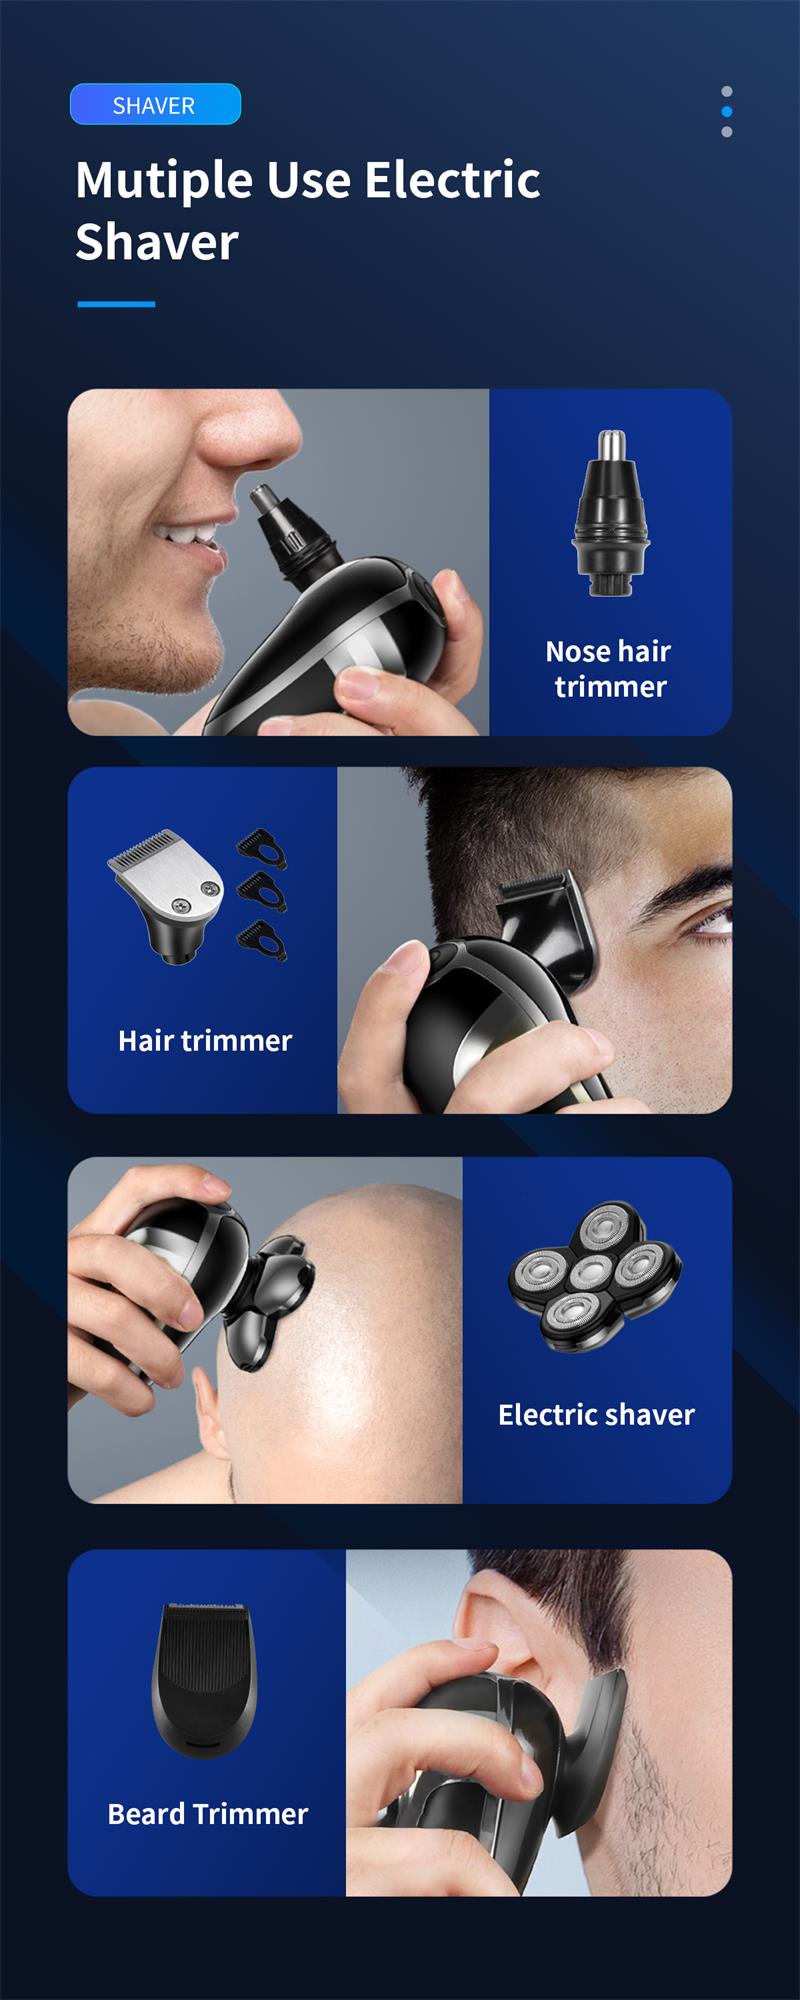 Do I need to use foam for an electric shaver?